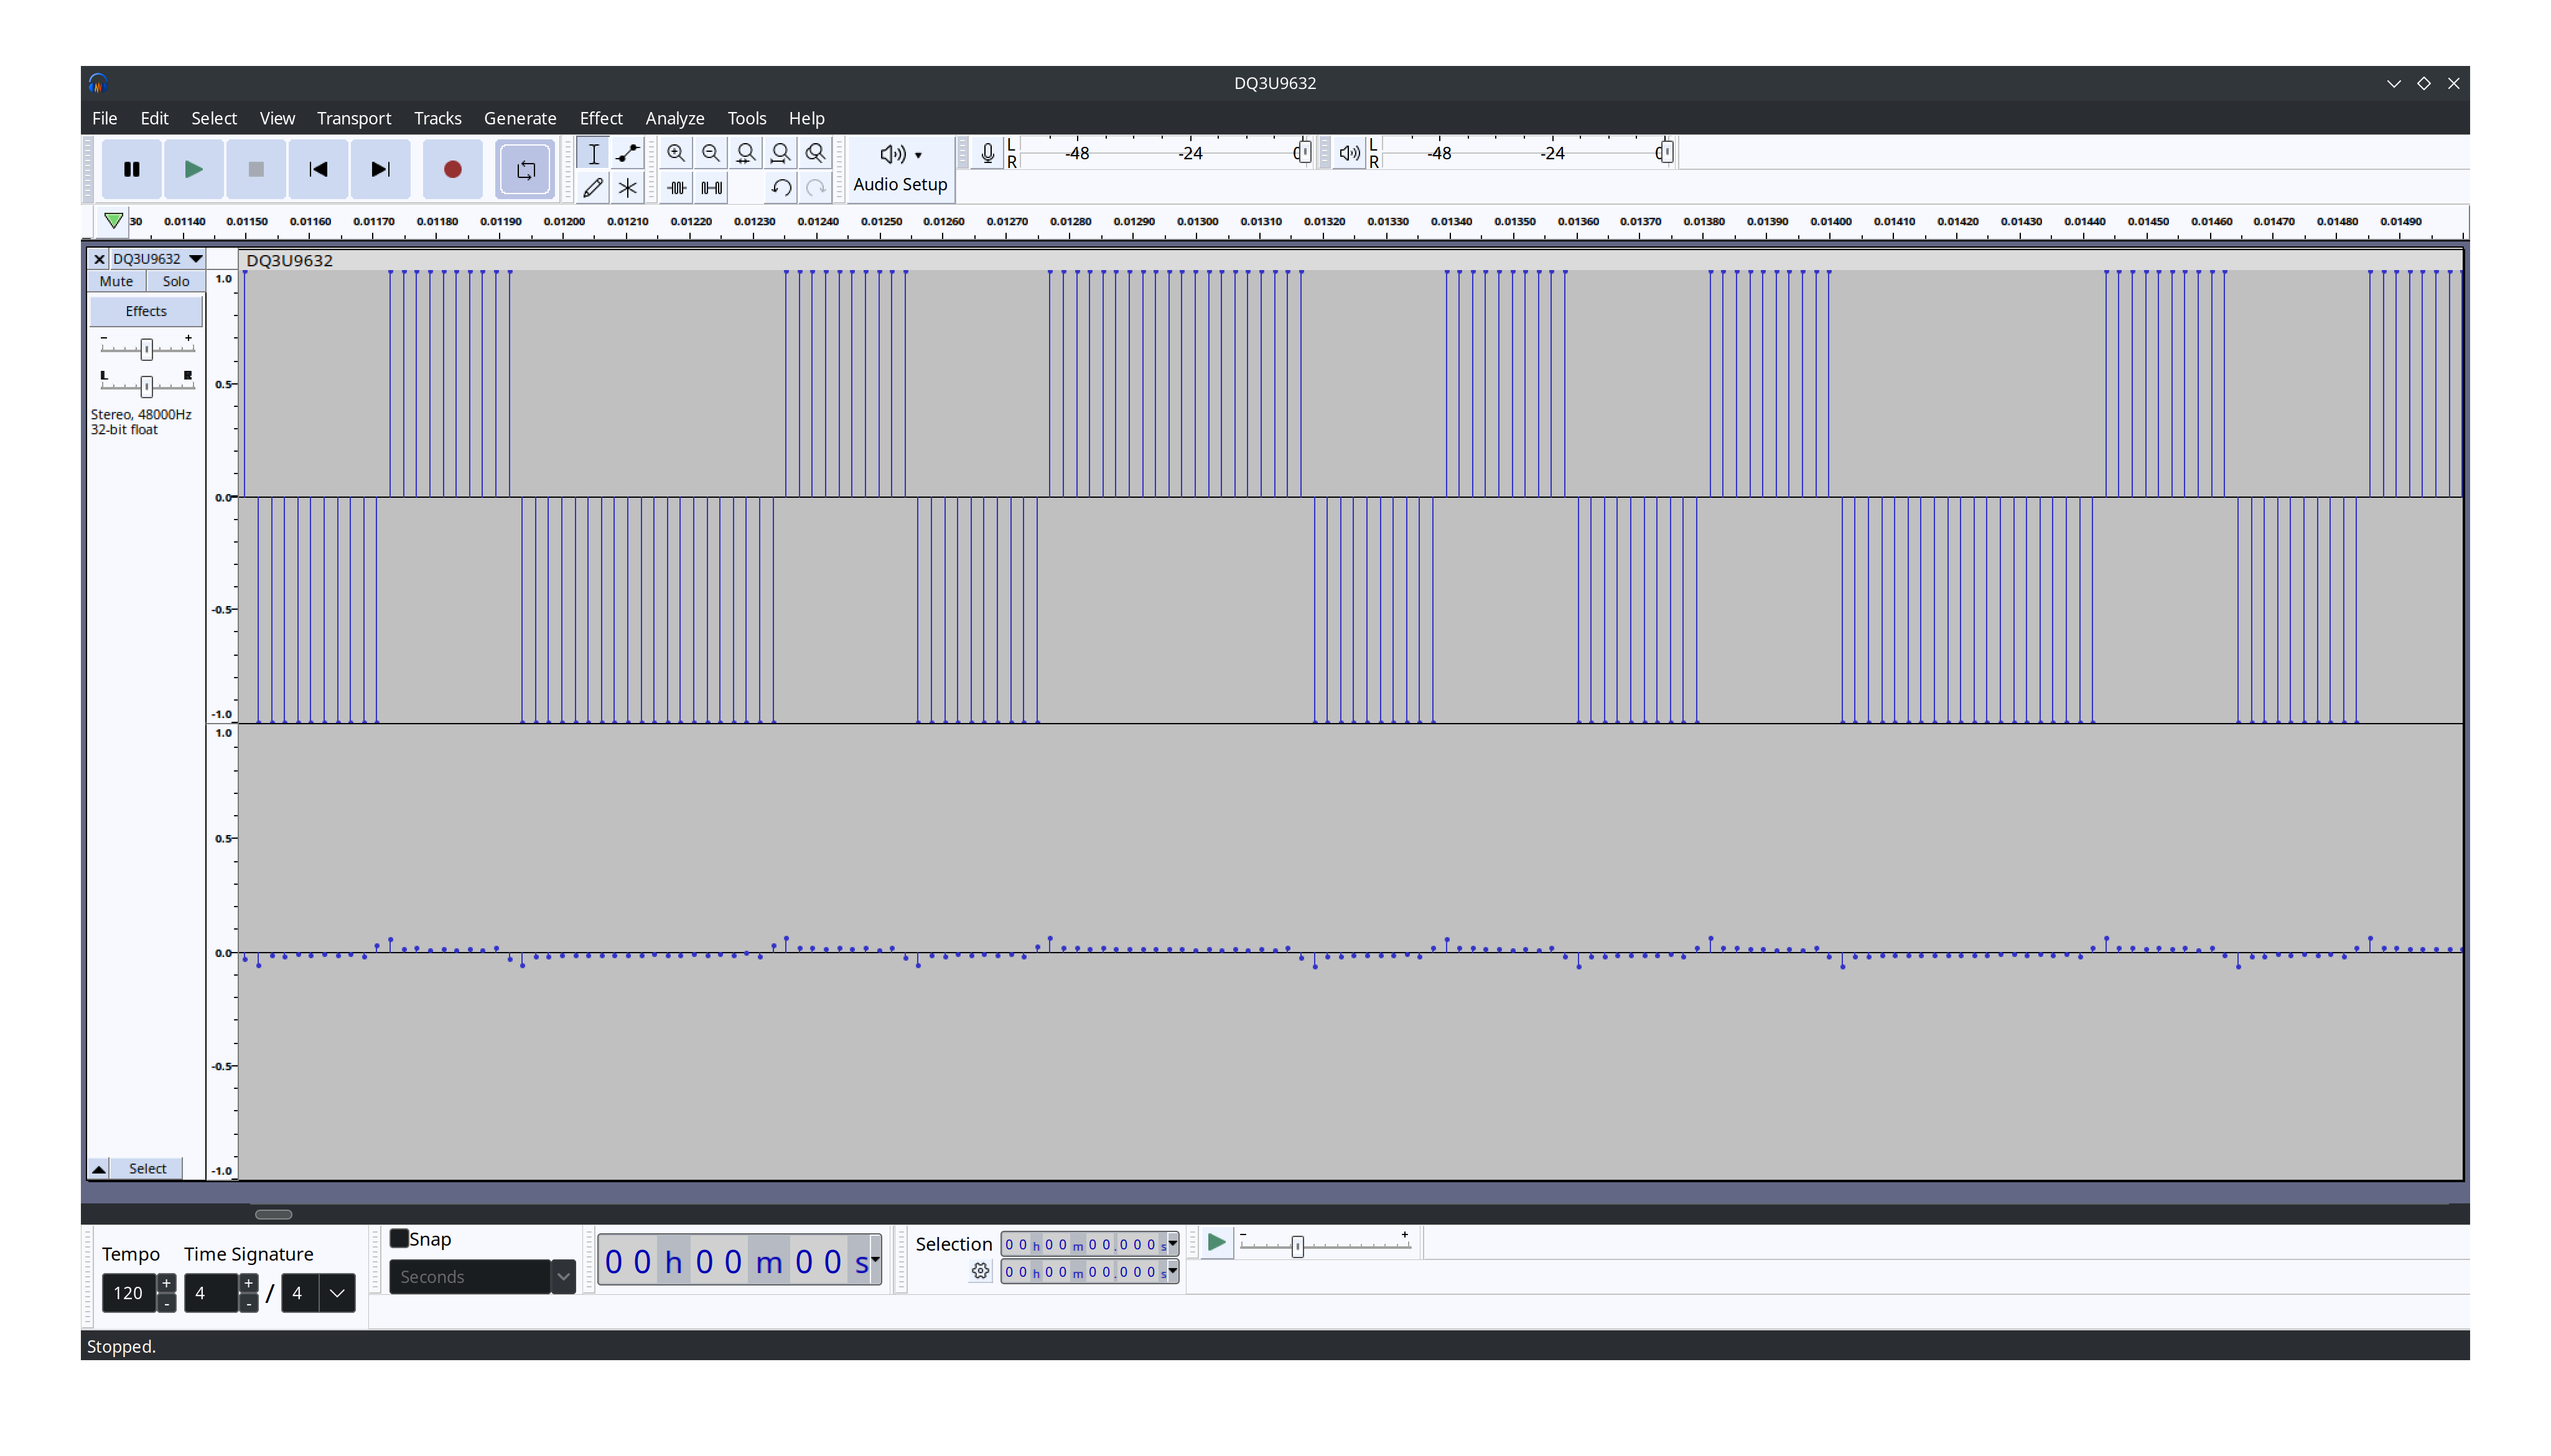 Tentacle Sync E output waveform recorded by Canon EOS-1D X